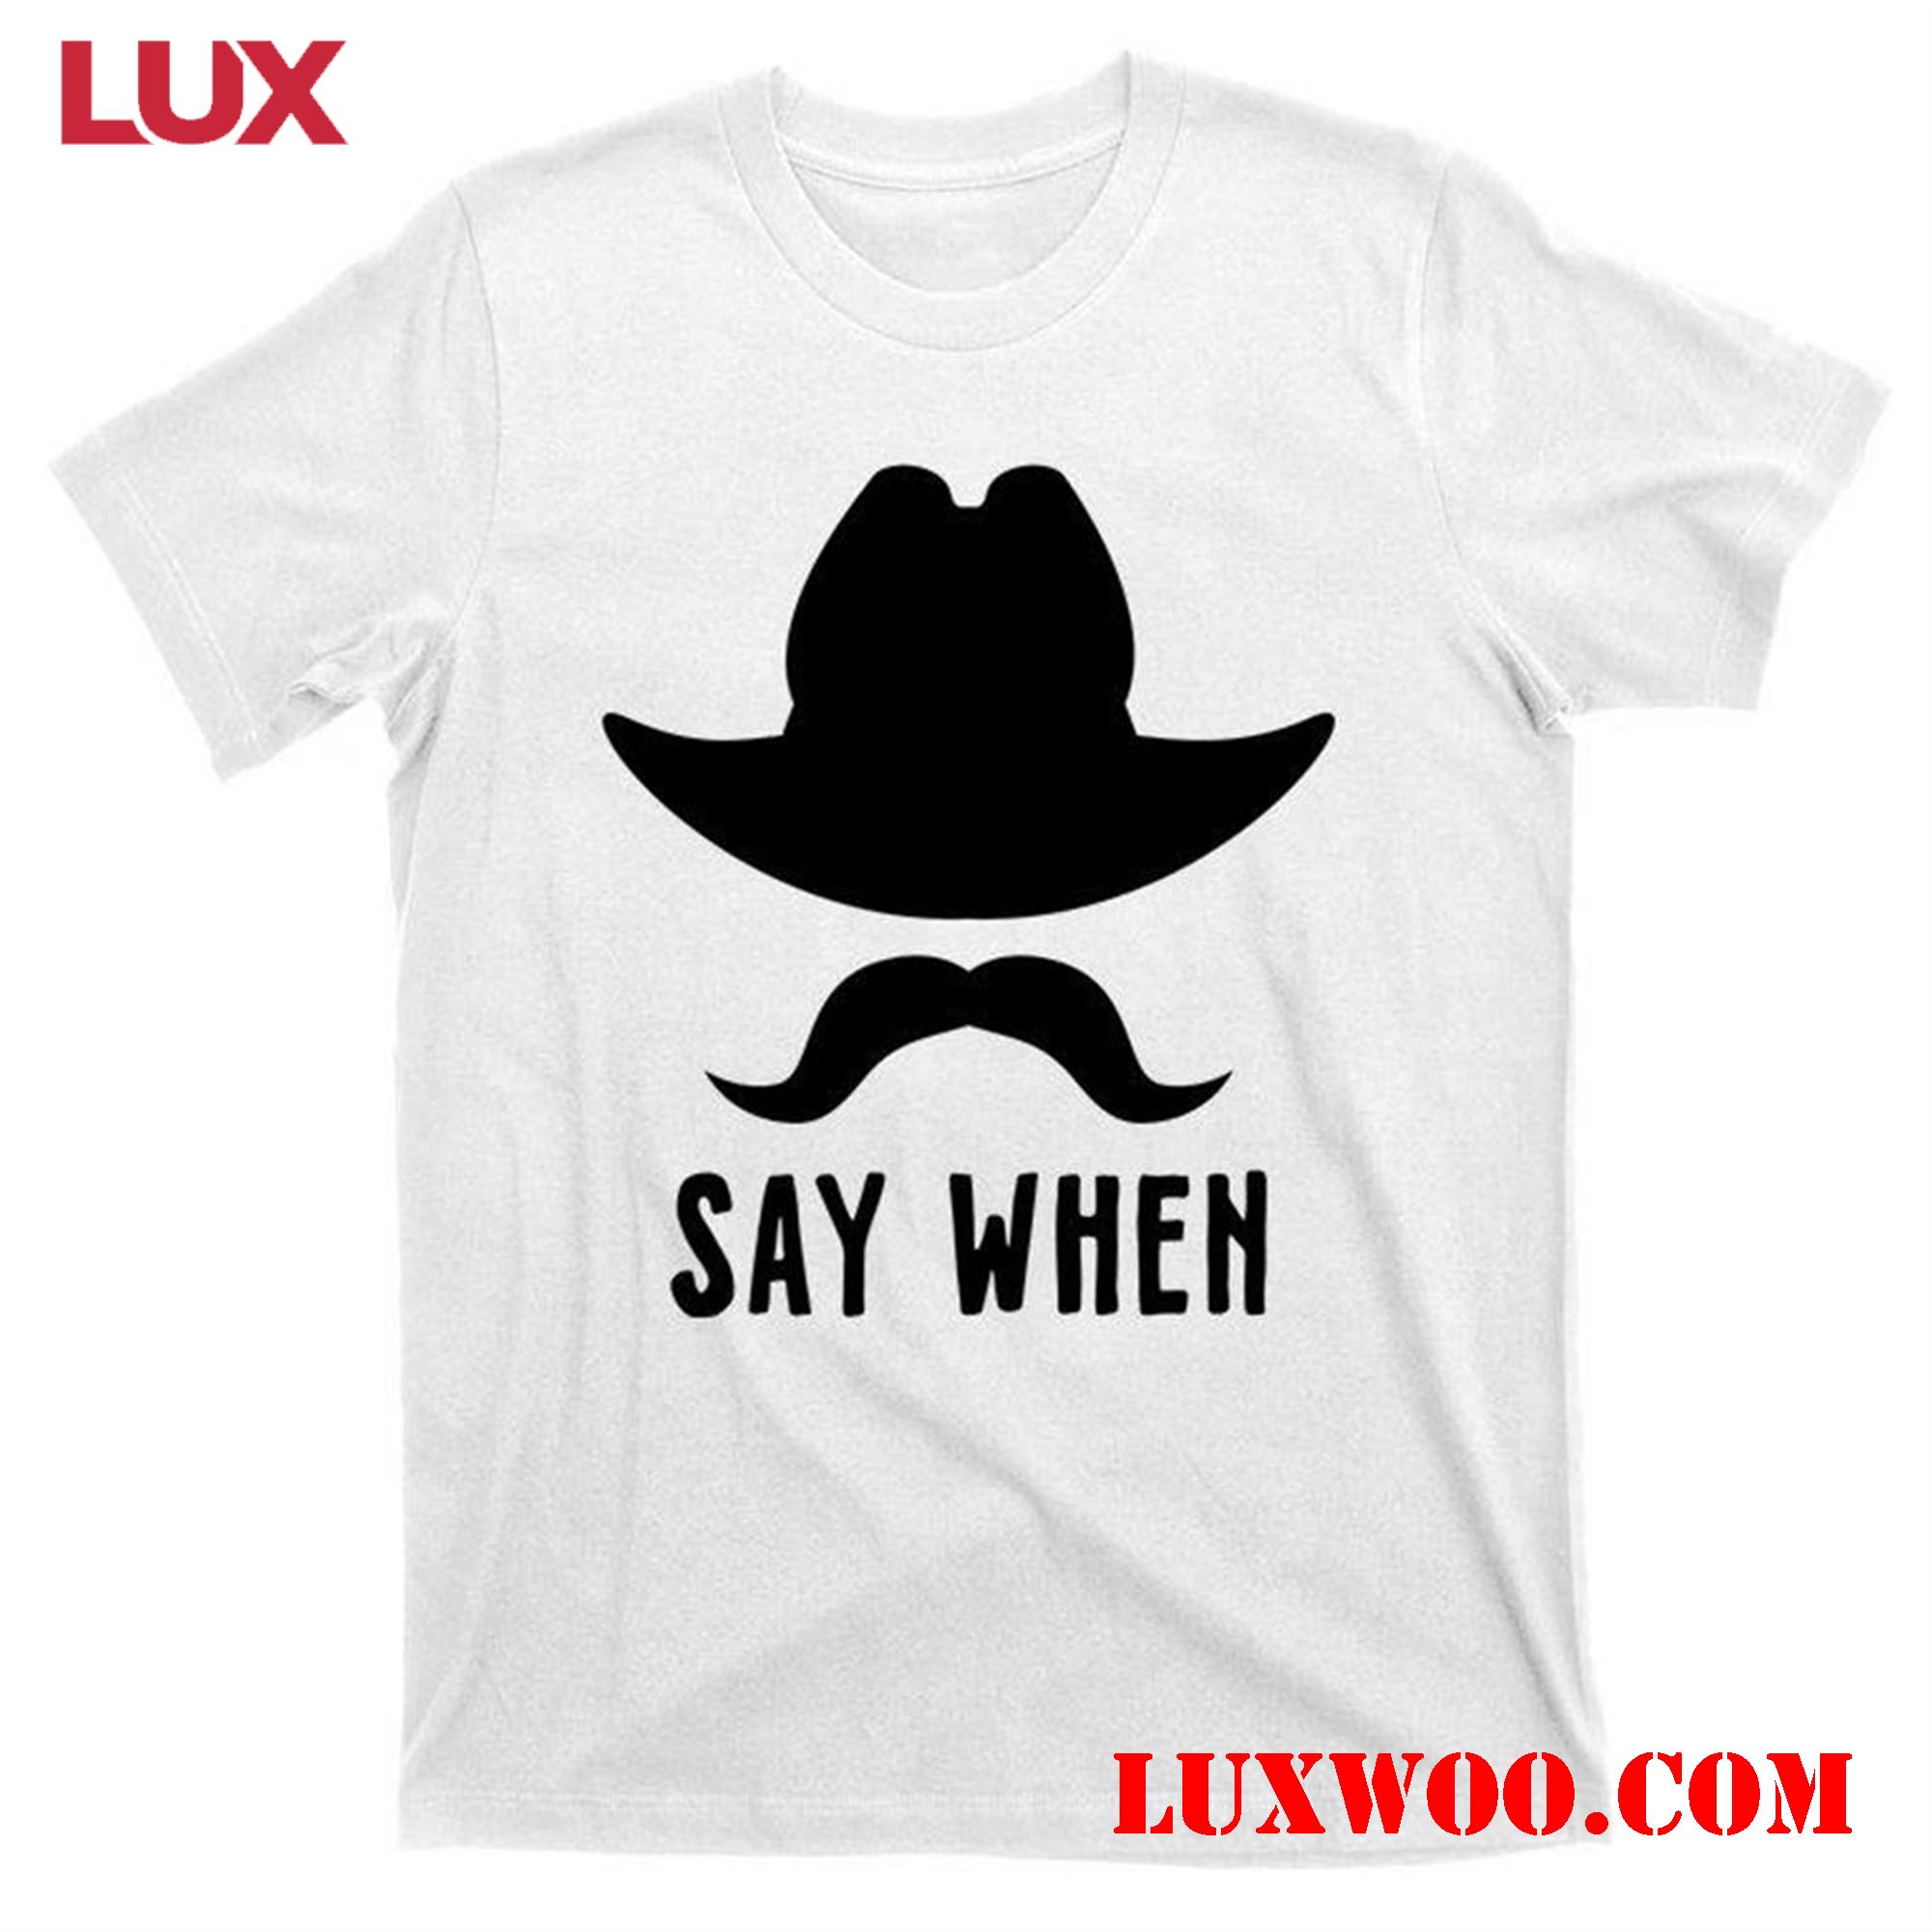 Unleash Your Style With The Trendy Say When Shirt 